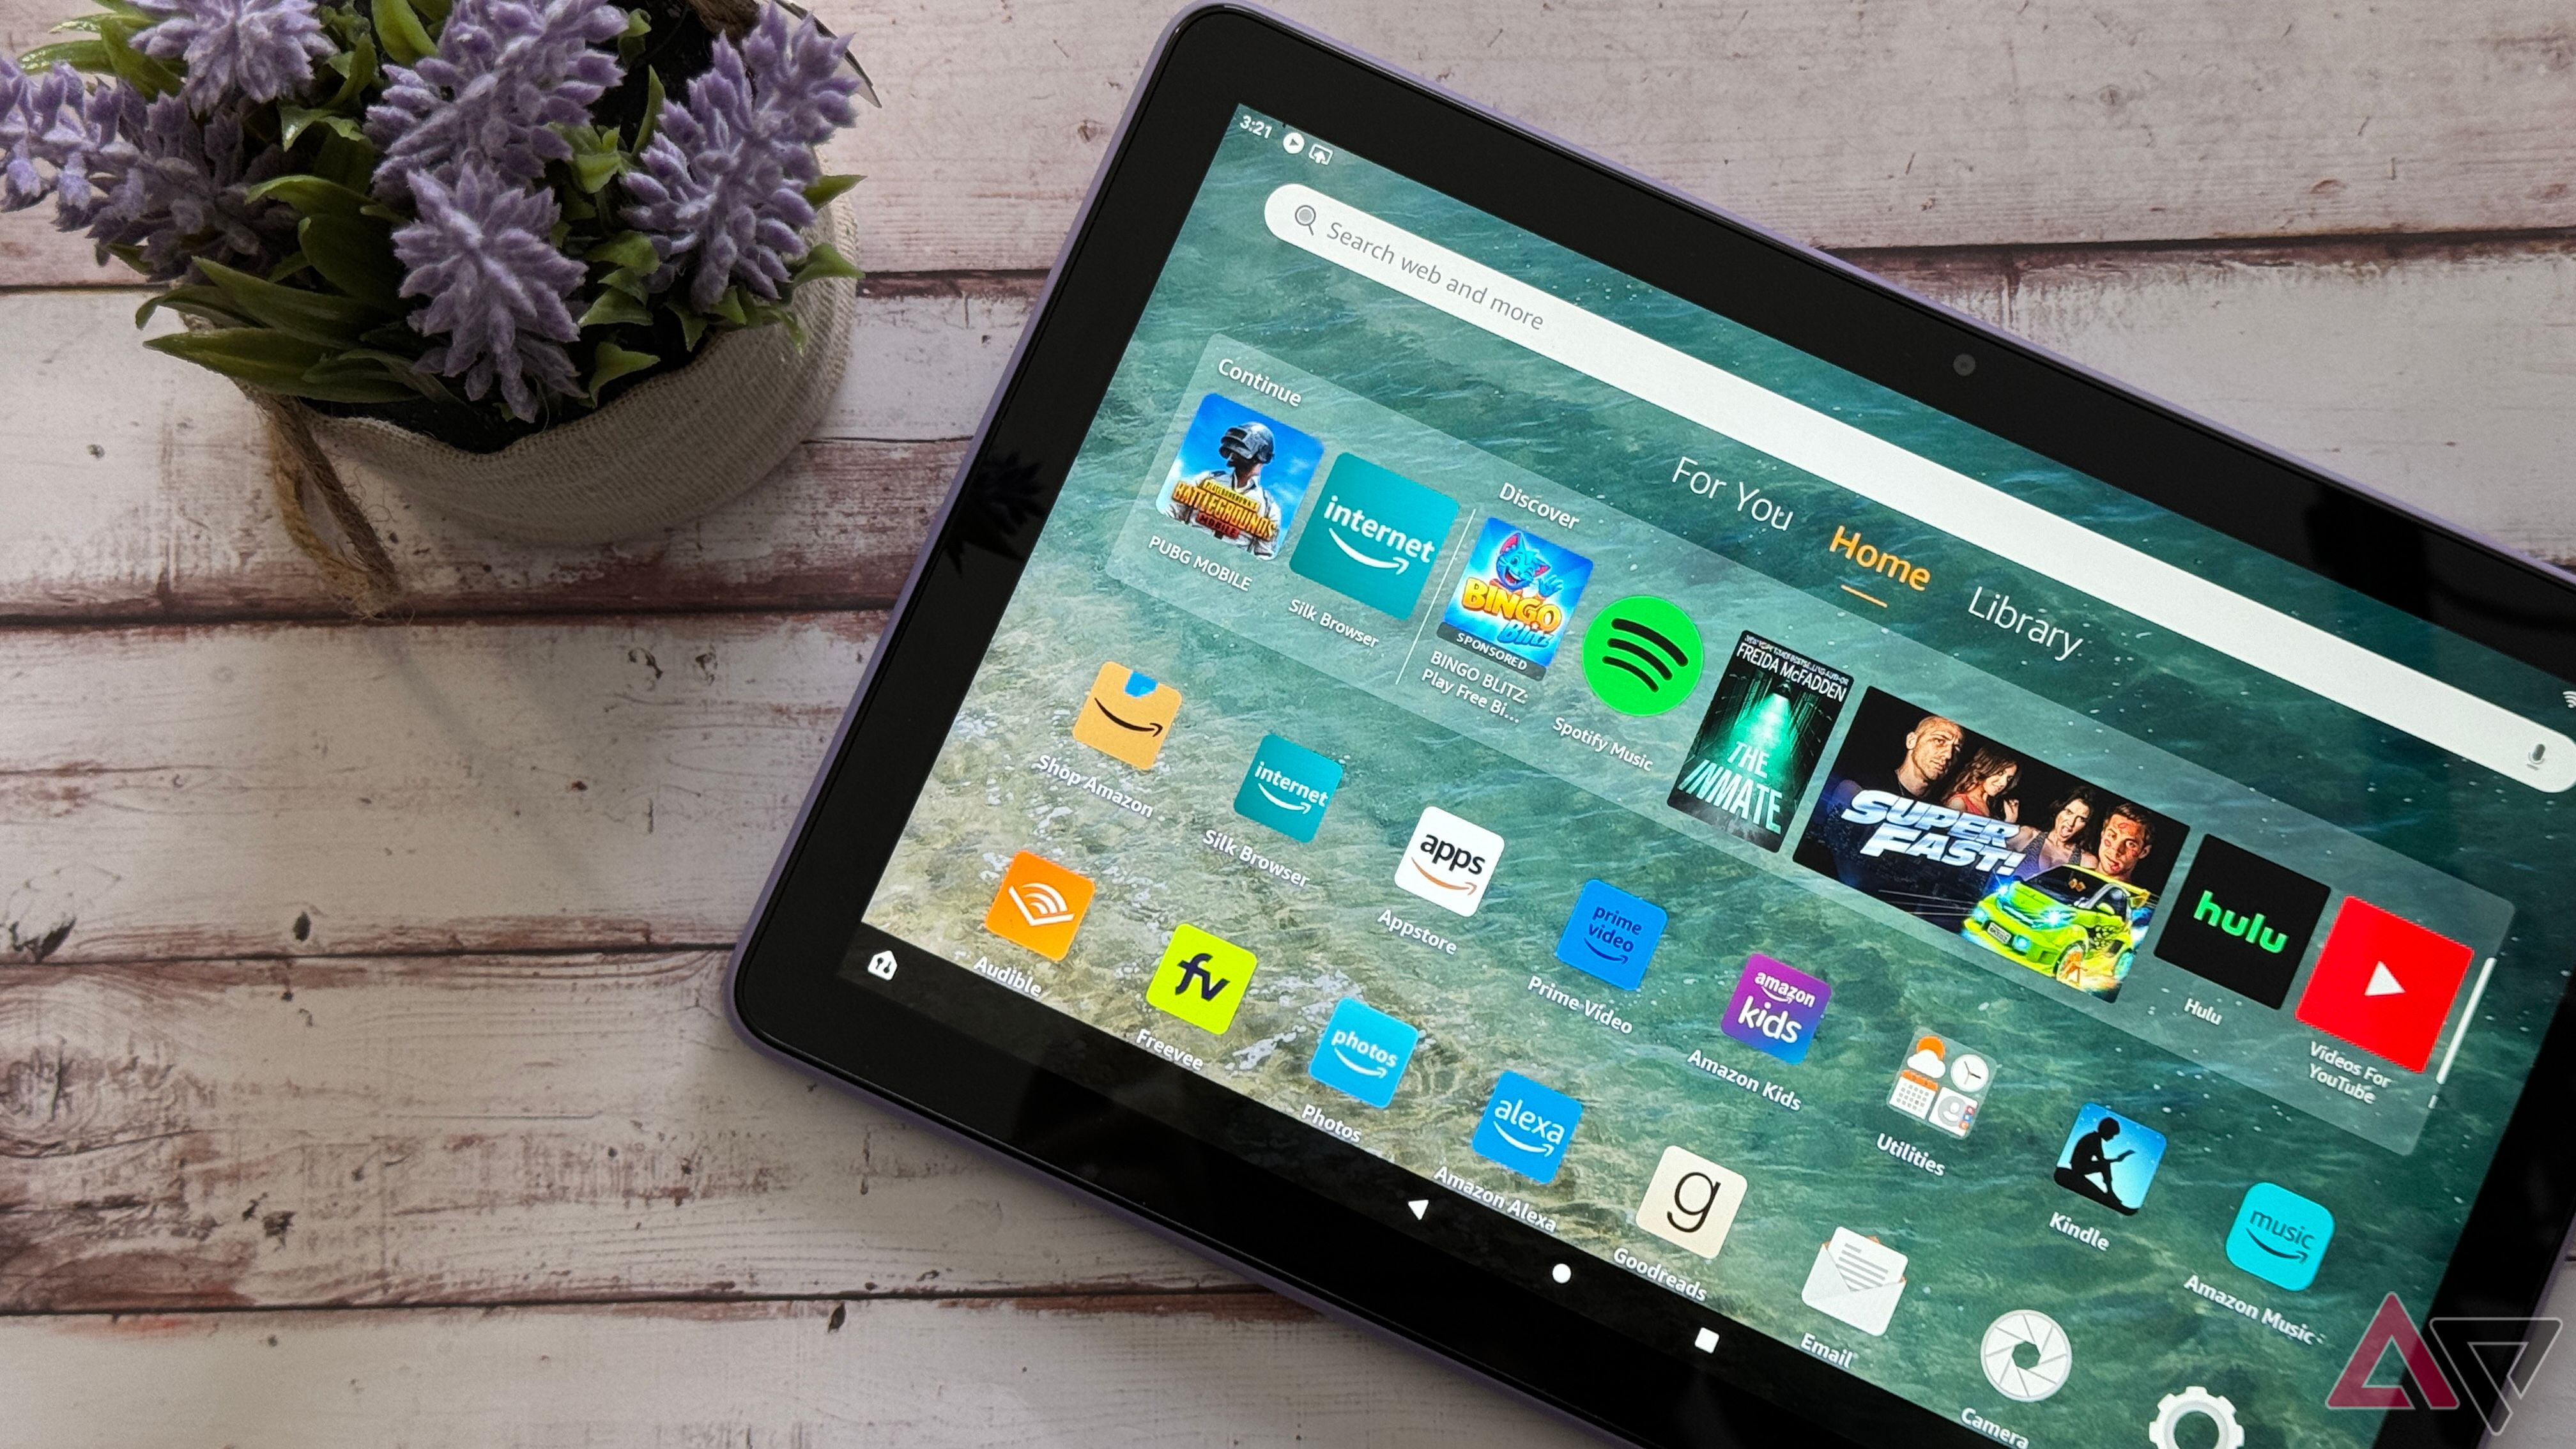 Home screen of the Amazon Fire HD 10